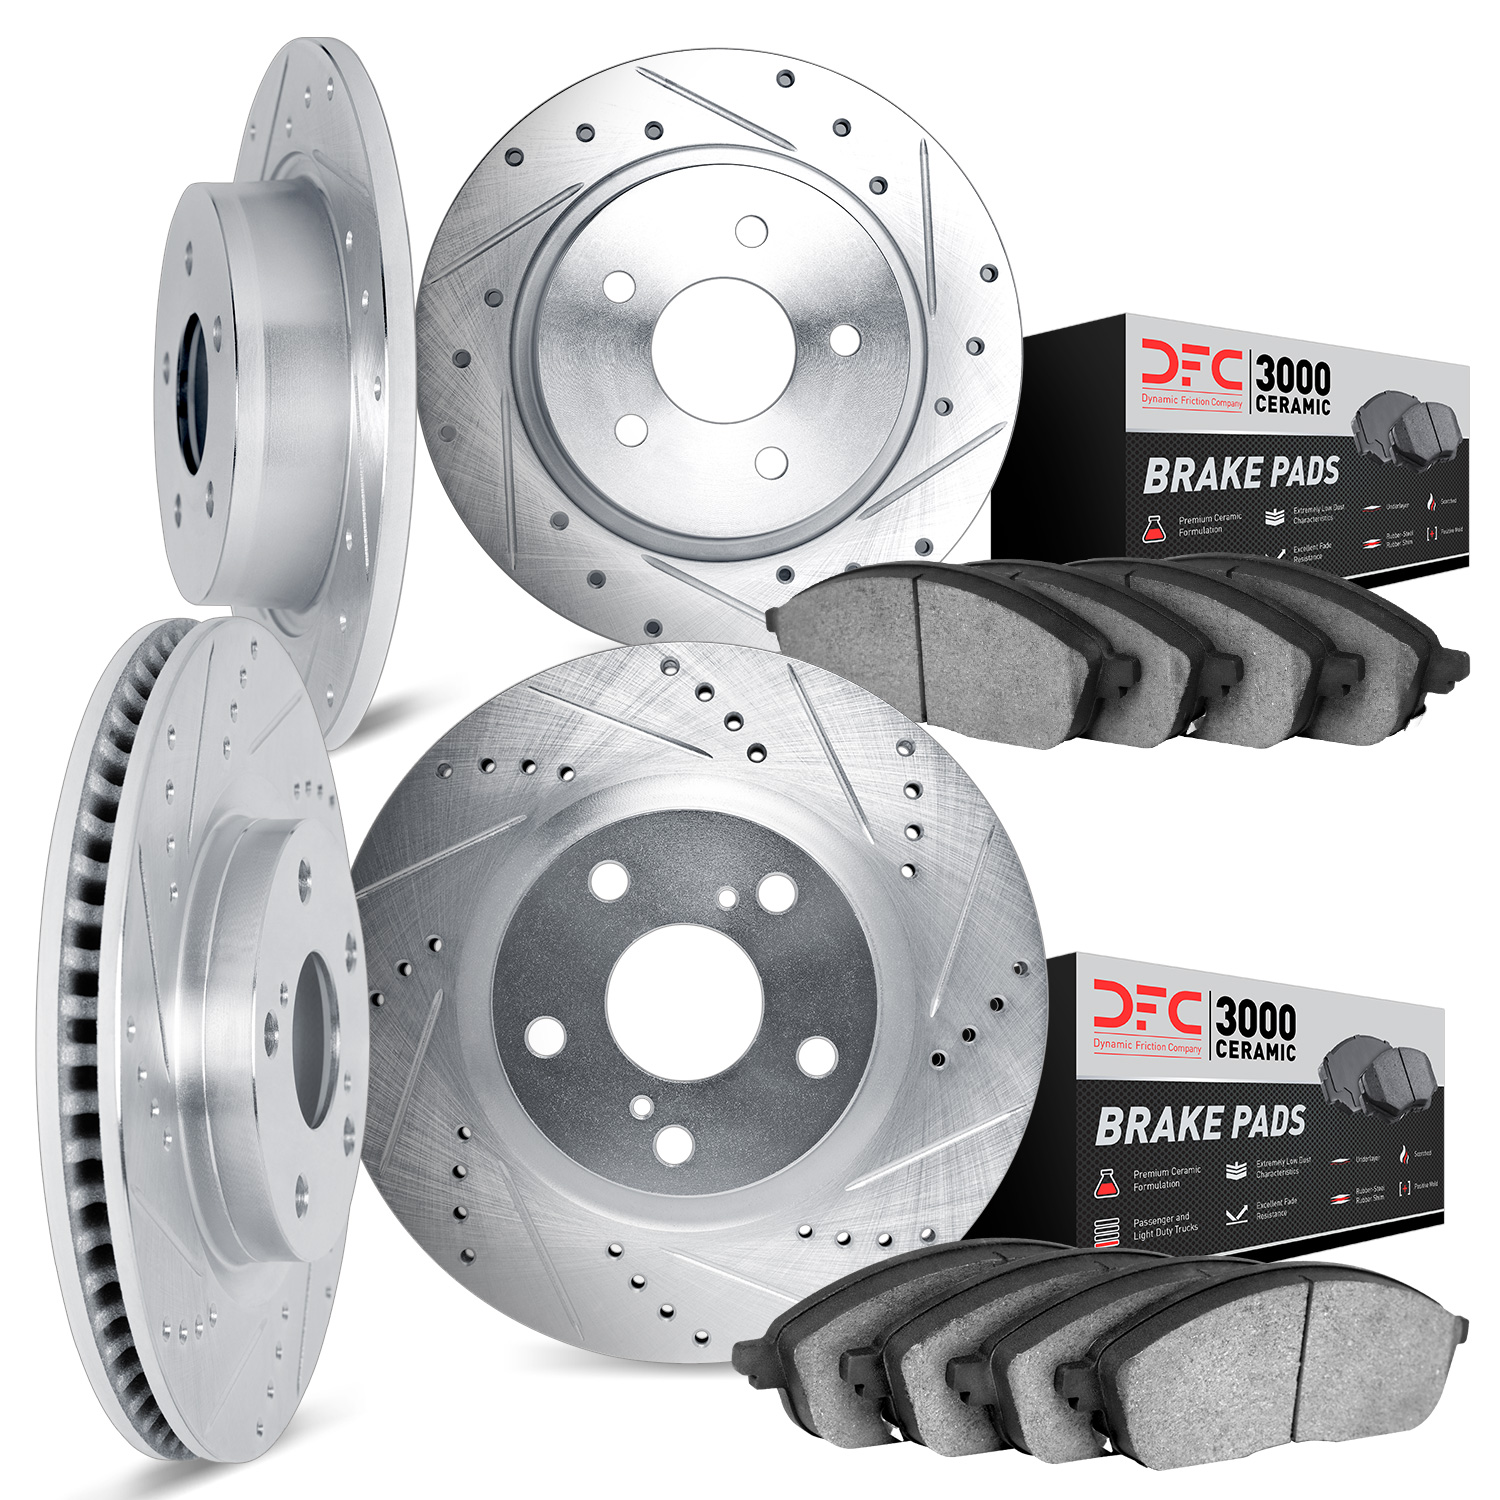 7304-54047 Drilled/Slotted Brake Rotor with 3000-Series Ceramic Brake Pads Kit [Silver], 1999-2003 Ford/Lincoln/Mercury/Mazda, P